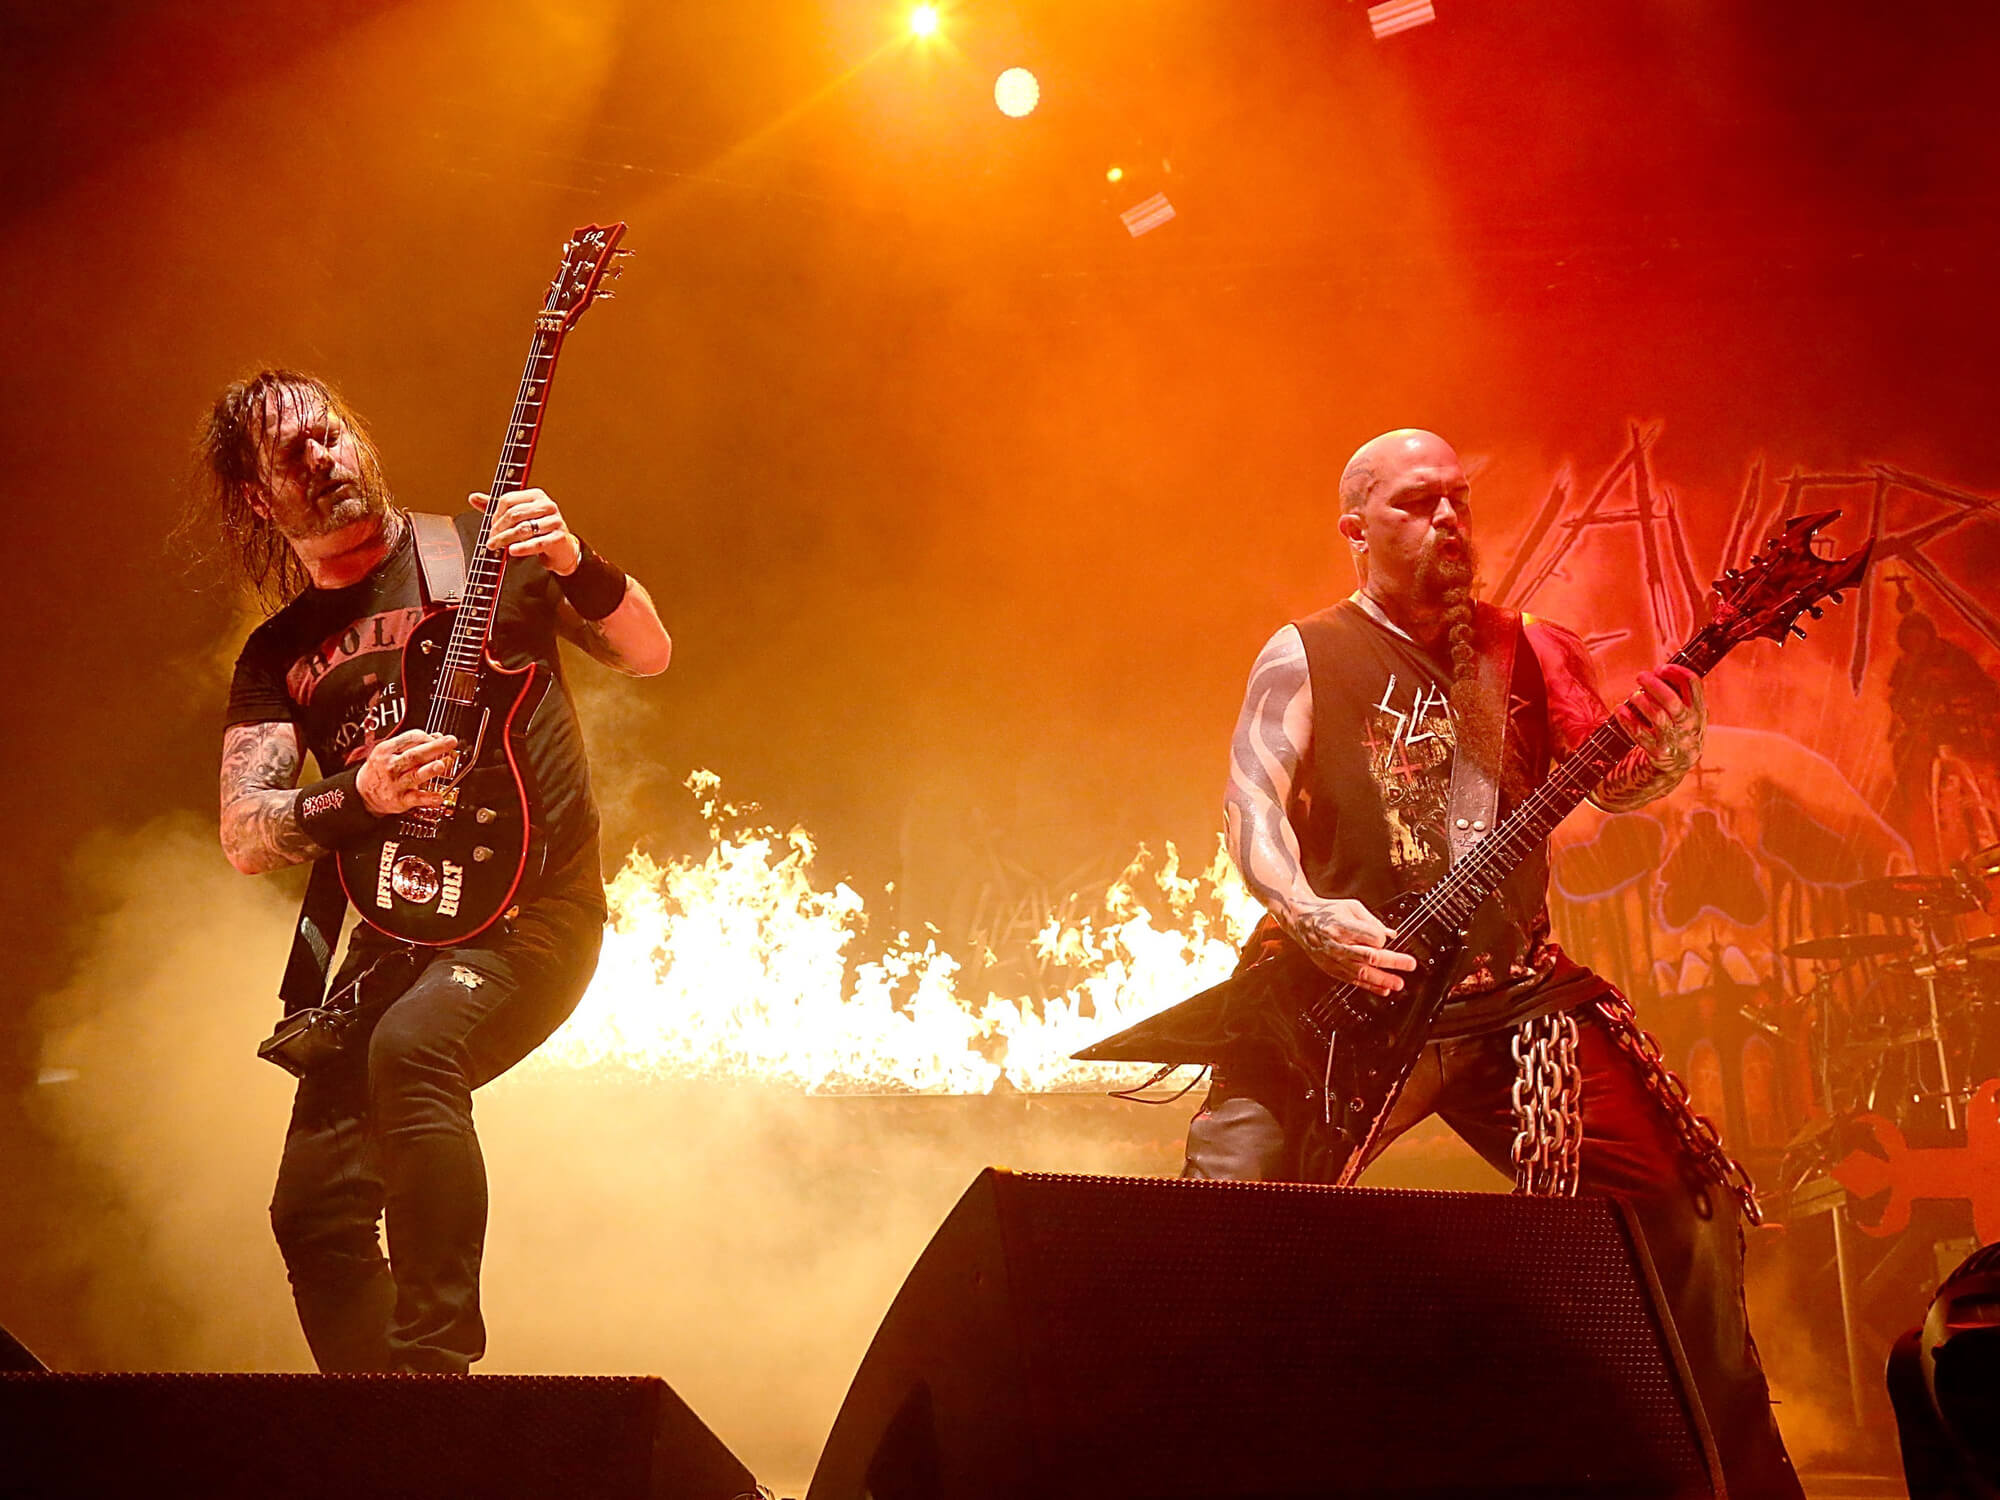 Slayer members Gary Holt and Kerry King performing